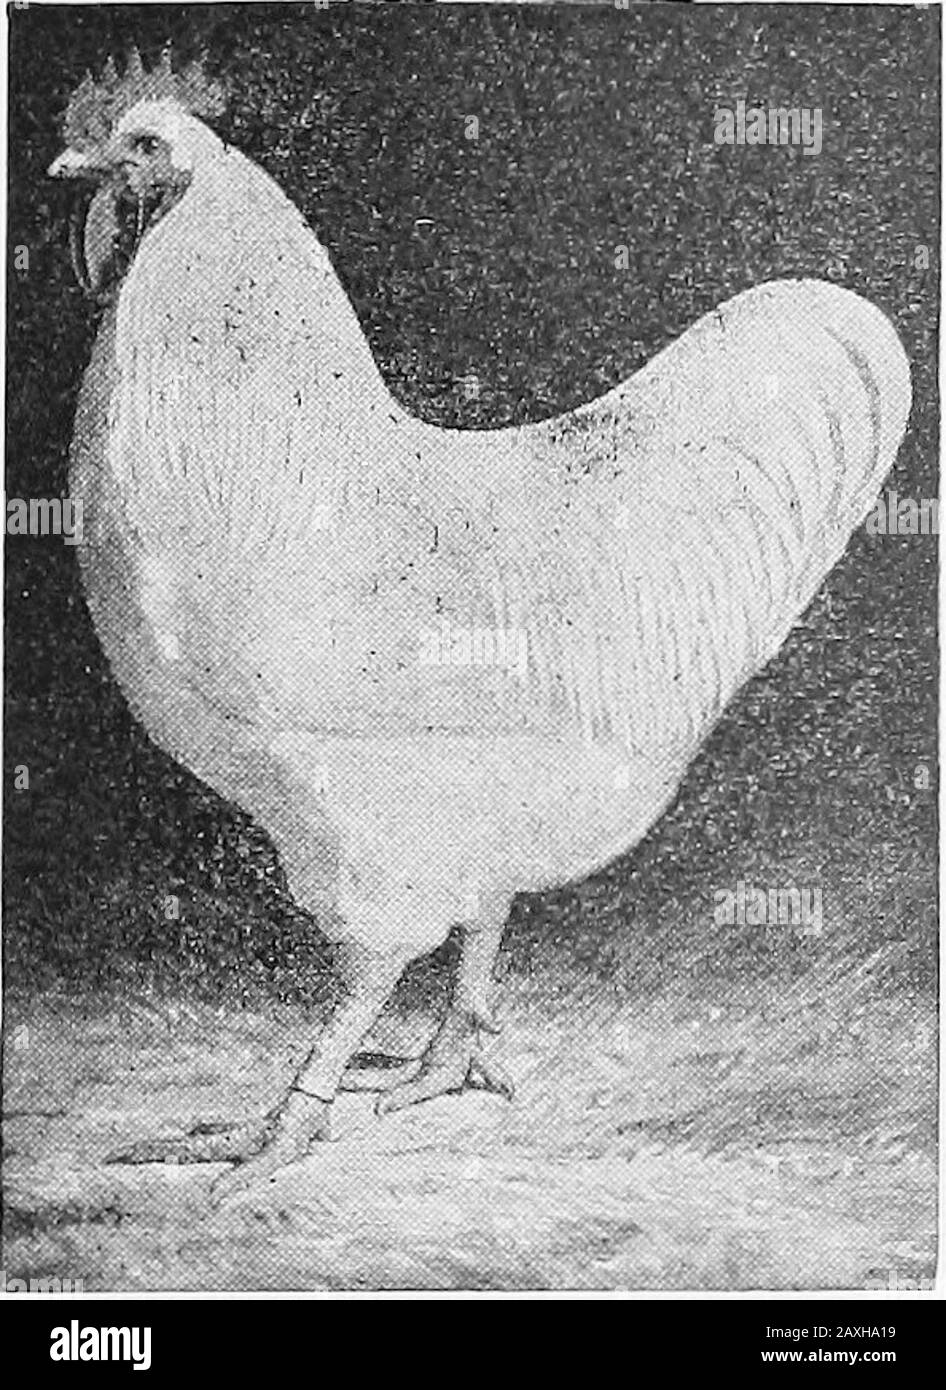 Poultry culture sanitation and hygiene . Fig. 8.—White Plymouth Rock hen.. Fig. 9.—White Plymouth Rock cook. 48 POULTRY CULTURE only Plymouth Rocks of absolute purity of Plymouth Rockblood. The foundation of the Partridge Plymouth Rock is thePartridge Cochin and the Silver Penciled Plymouth Rock andis founded on the Dark Brahma. The Buff Plymouth Rocks are a conglomeration. Thefirst ancestors were bred by Mr. Wilson, of Massachusetts,who crossed the Buff Cochin on the Light Brahma, and Mr. Stock Photo